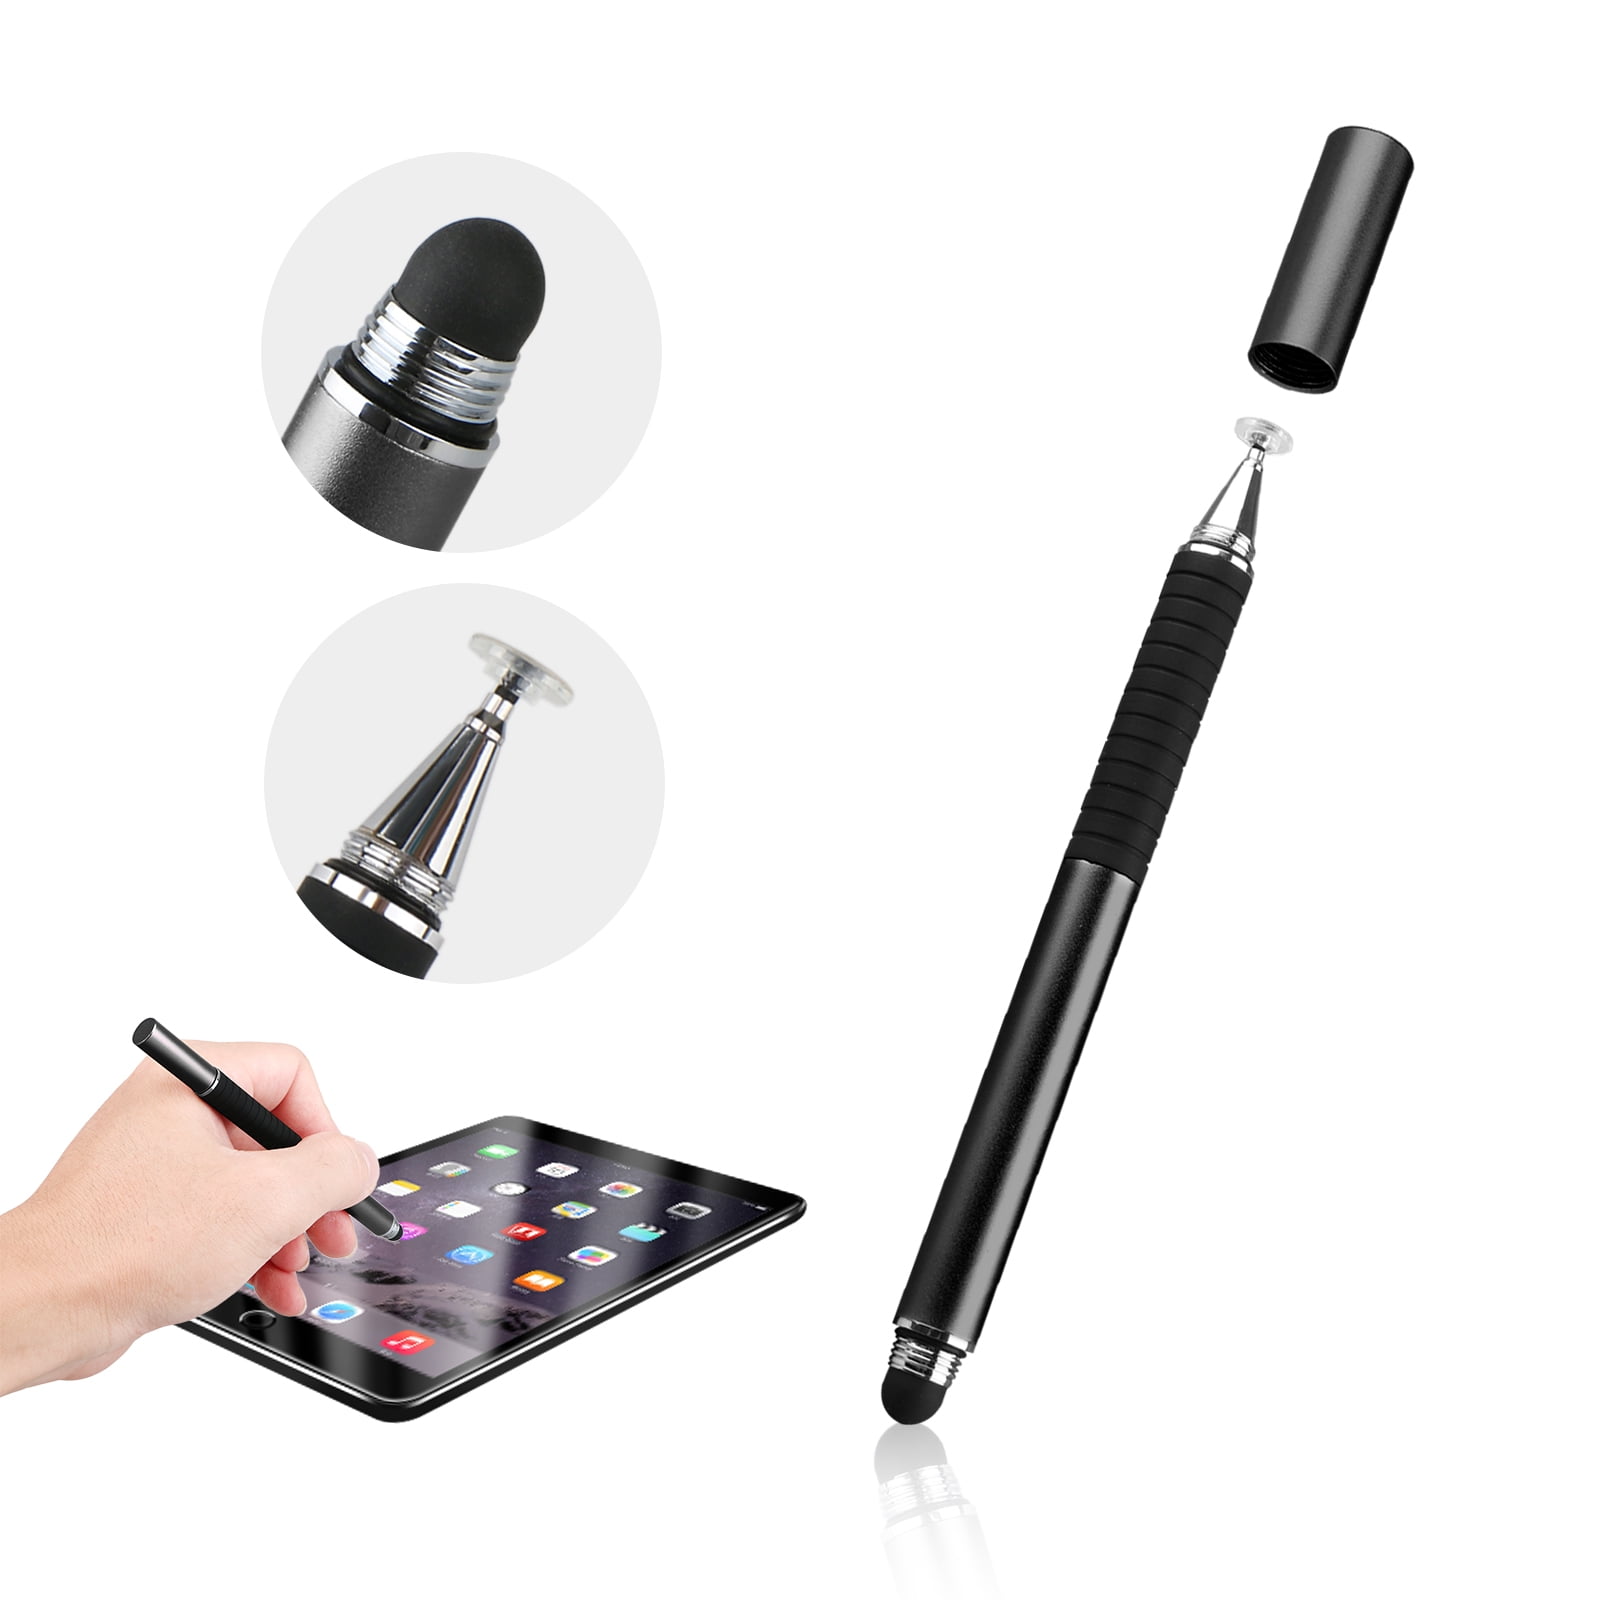 For iPad 2/3/4/mini/Air/Pro Screen Touch Pen Stylus With USB Wire Charger JU 